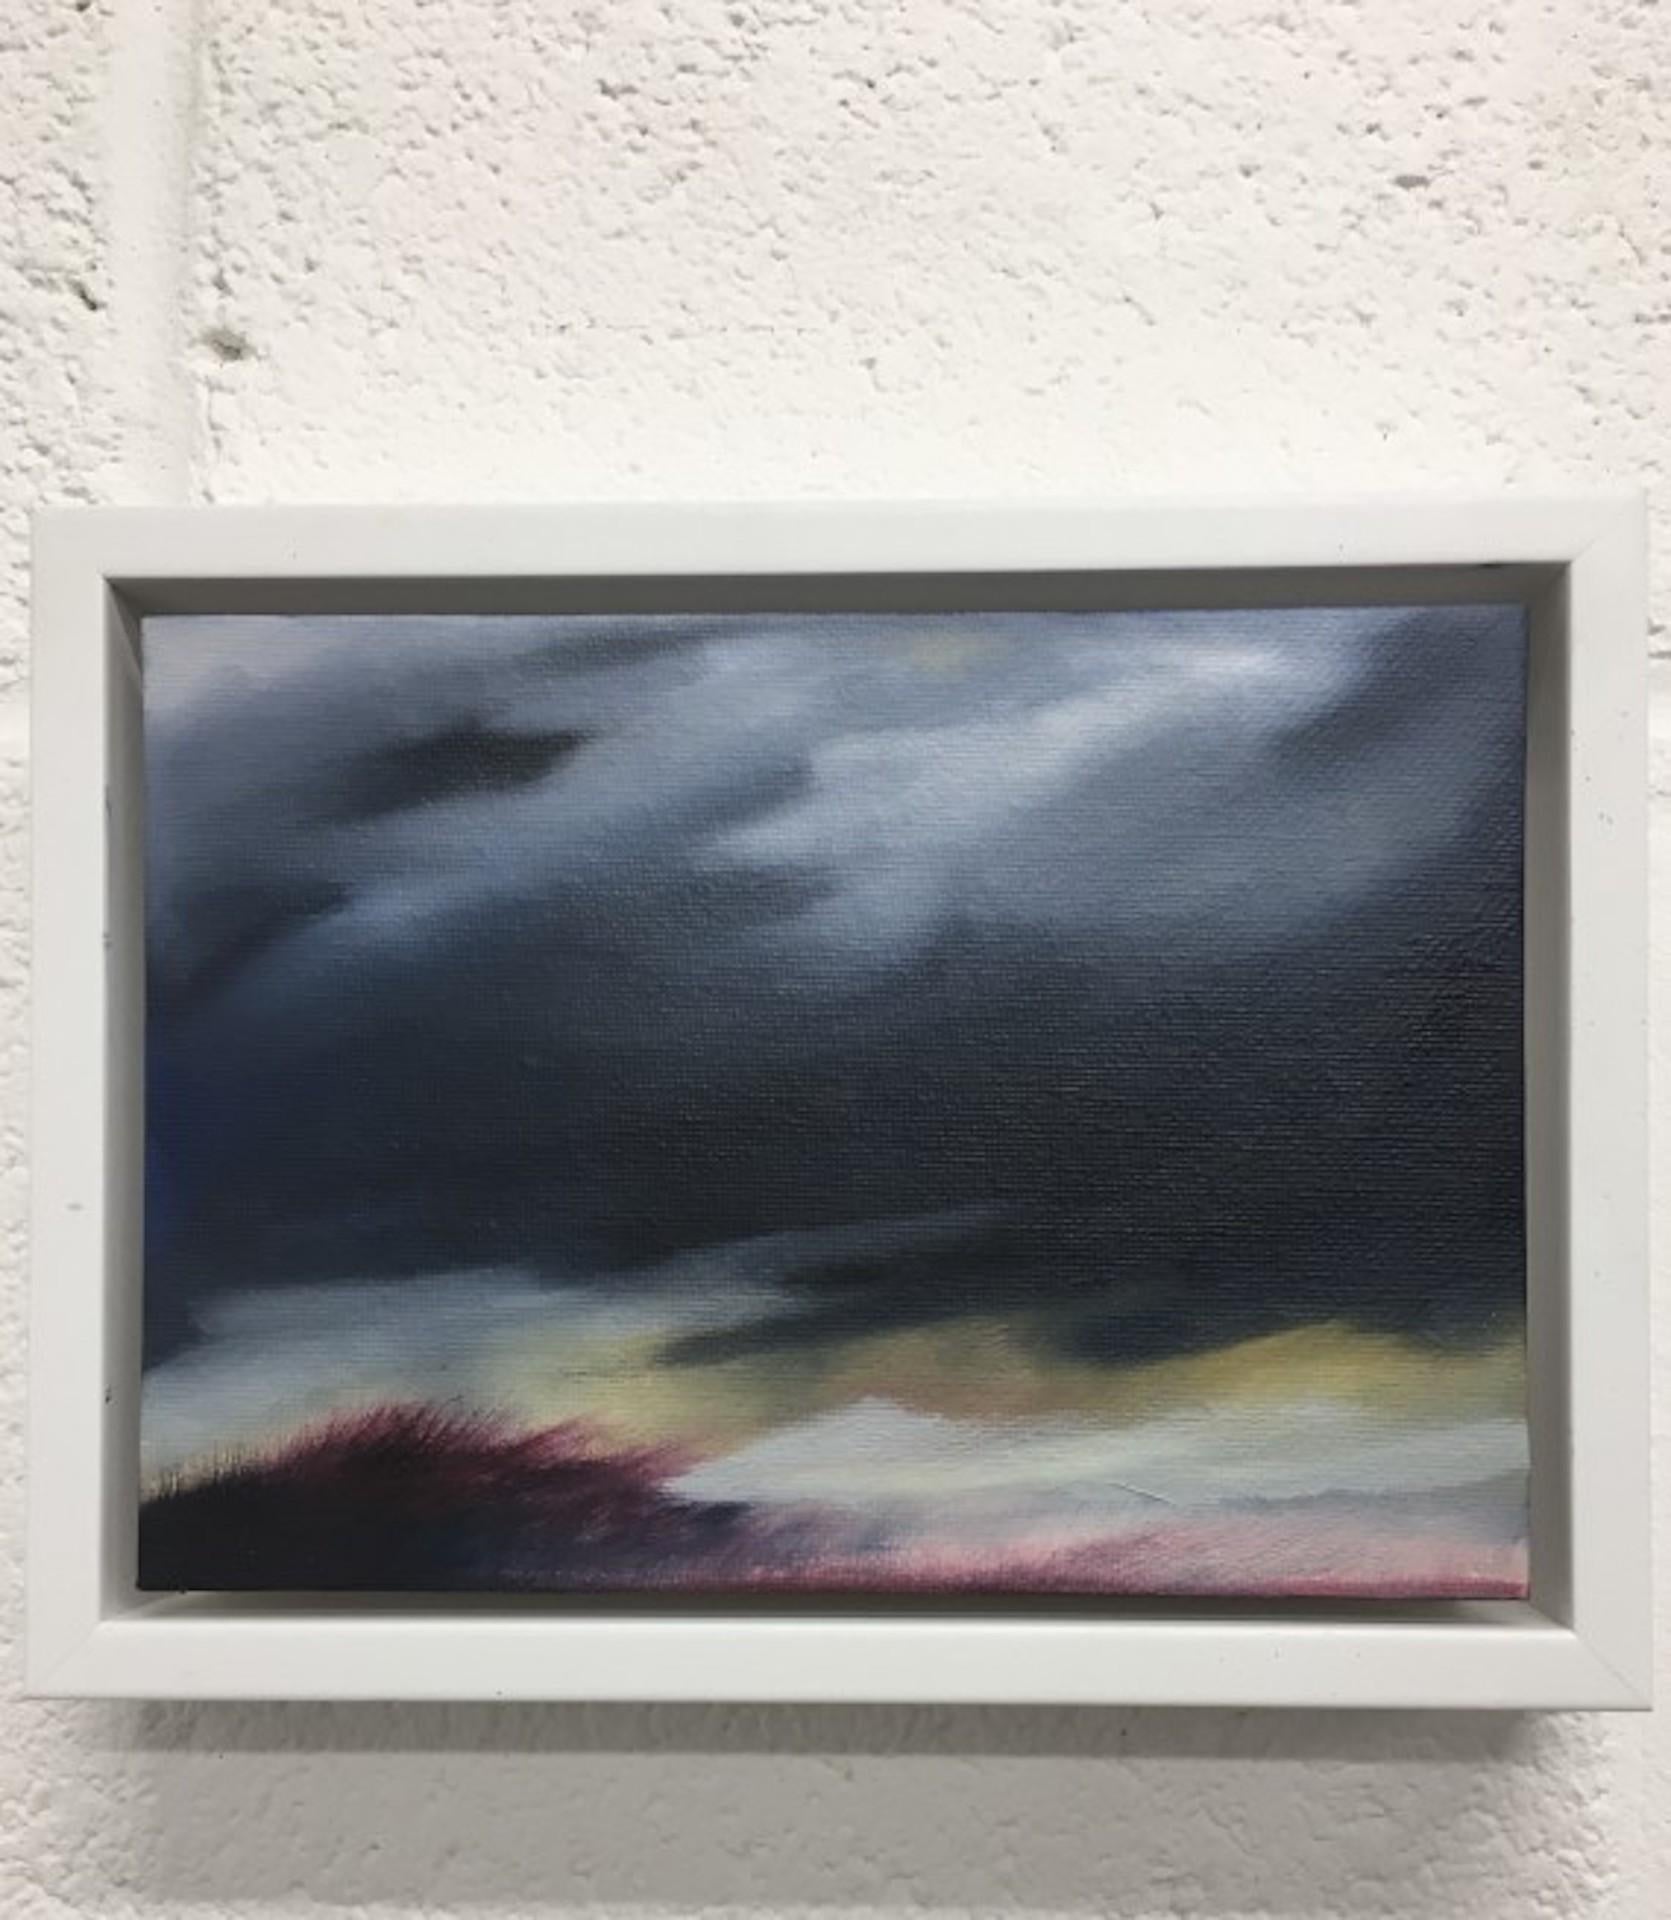 Sophie Berger
Sweeping Winds
Original
Landscapes and seascapes
Oil Paint on Canvas
Image size: H:15 cm x W:21 cm
Complete Size of Unframed Work: H:15 cm x W:21 cm x D:0.5cm
Frame Size: H:20 cm x W:26 cm x D:4cm
Sold Framed

Please note that insitu